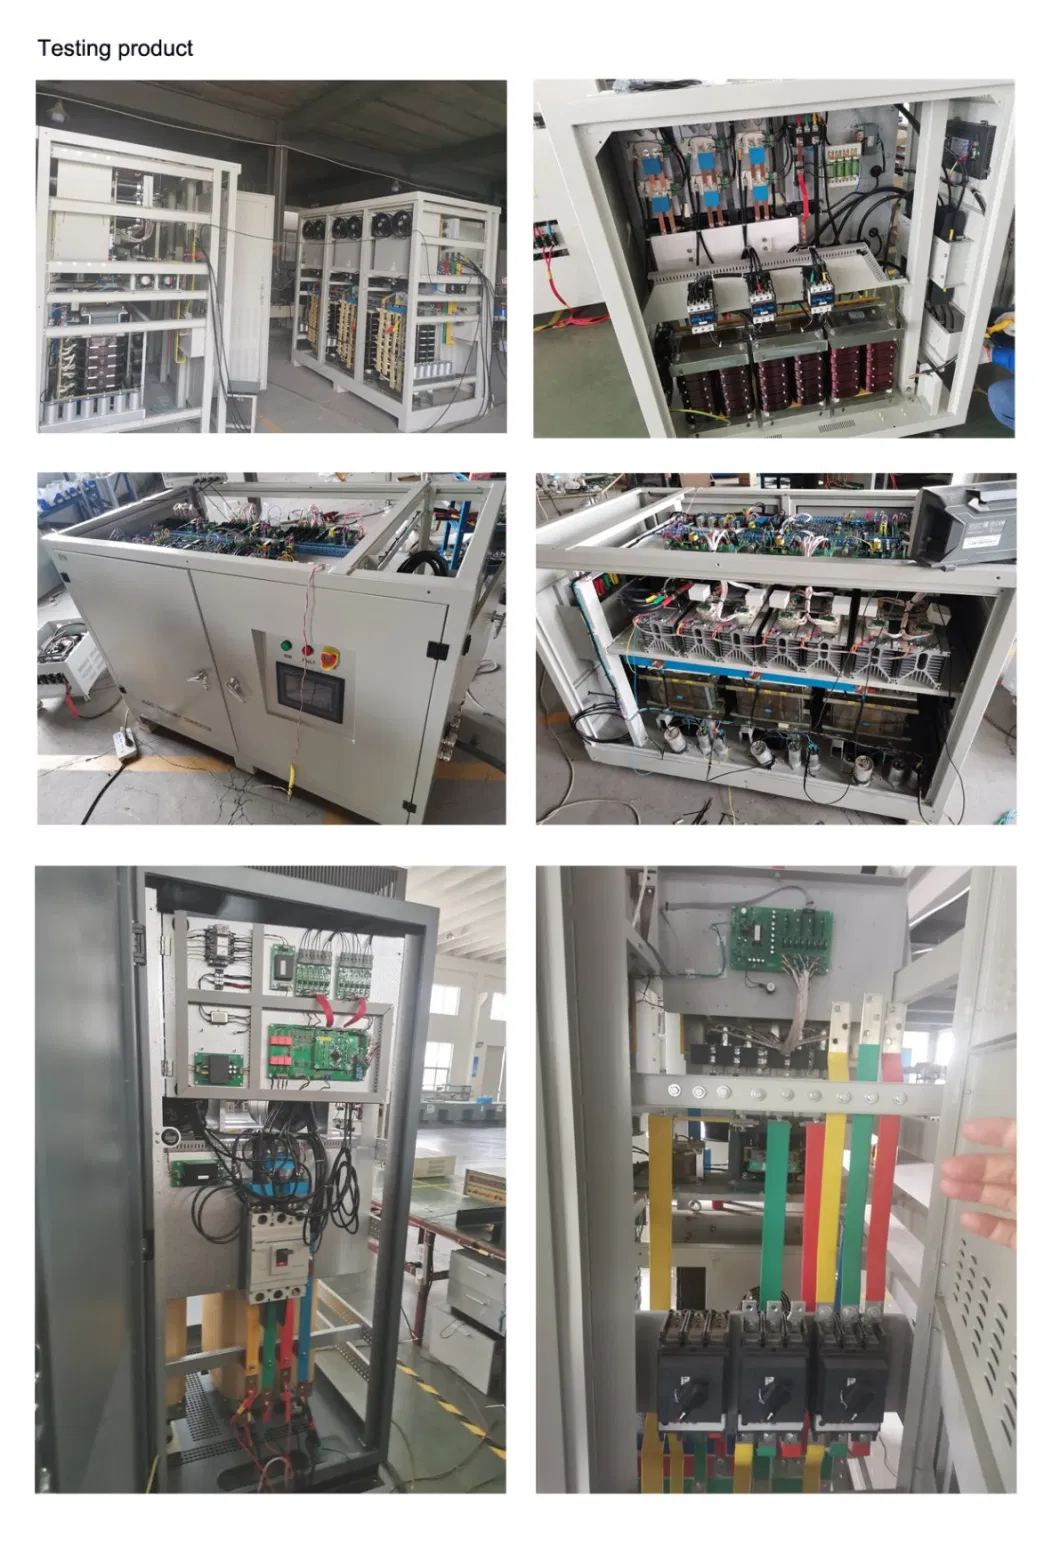 100kVA 300kVA 500kVA 600kVA 800kVA 1000va 1200kVA 1600kVA 2000kVA 50Hz to 60Hz Shore Frequency Converter Static Frequency Converter